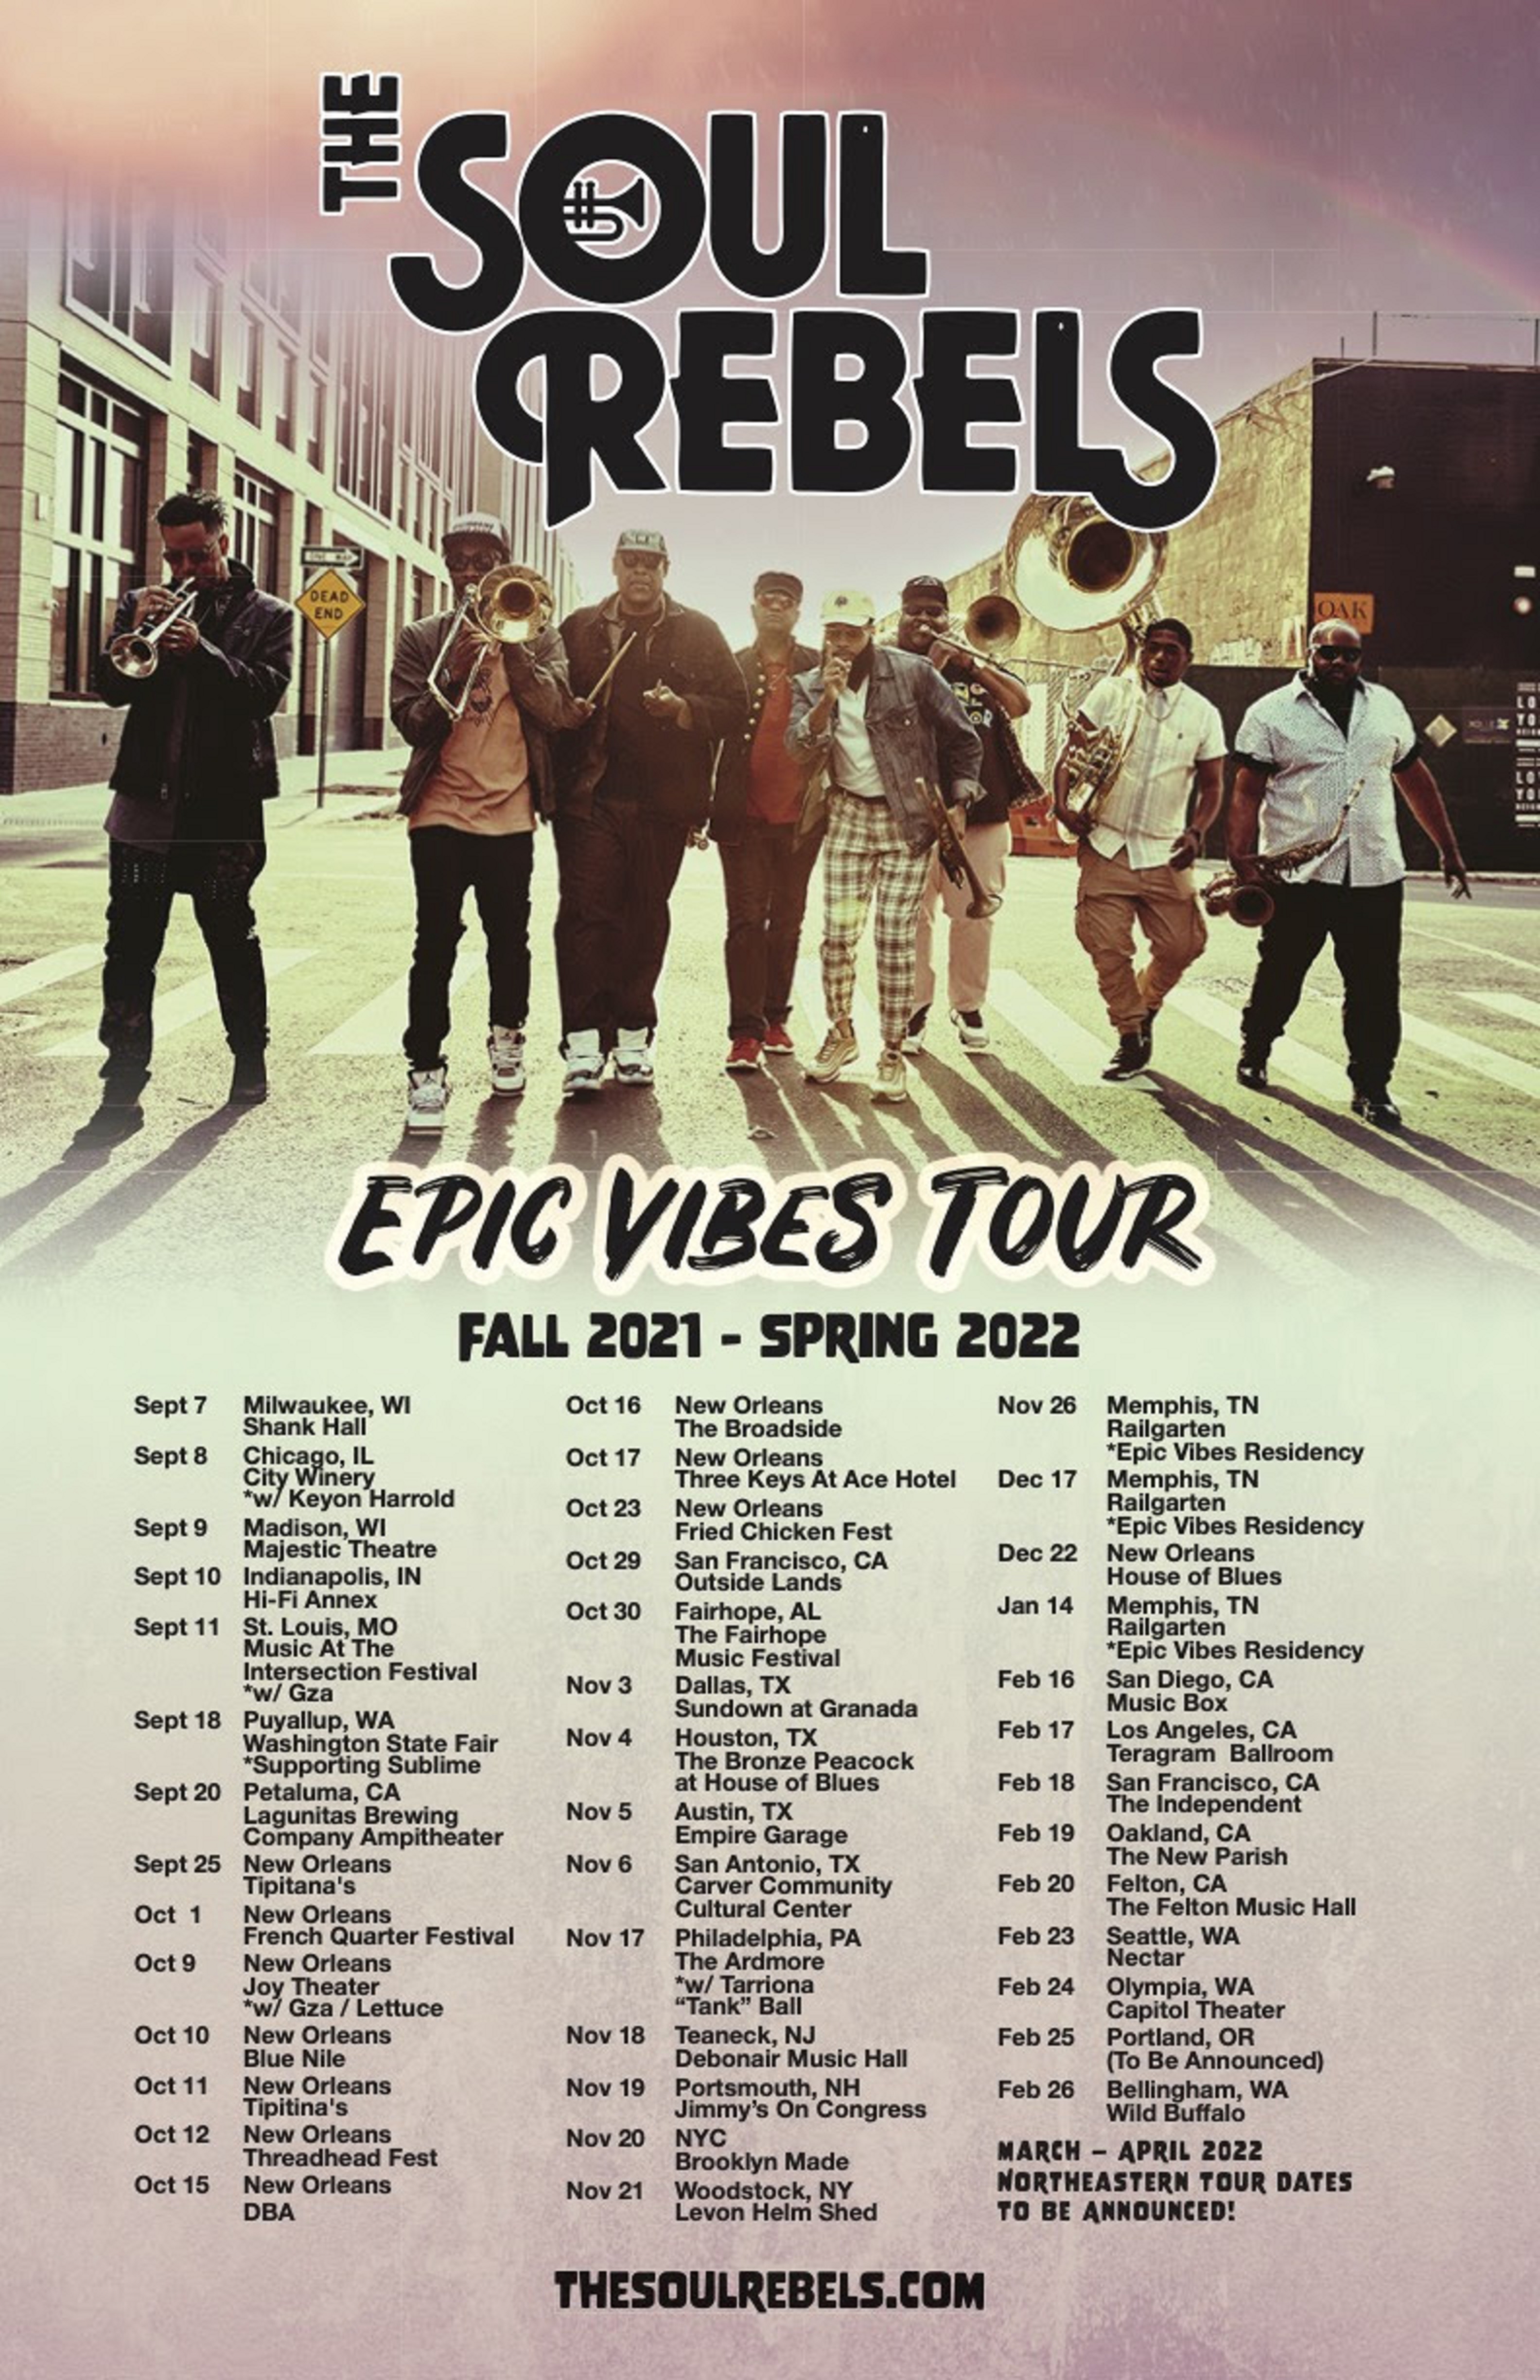 The Soul Rebels Announce 'Epic Vibes Tour' Fall '21 - Spring '22